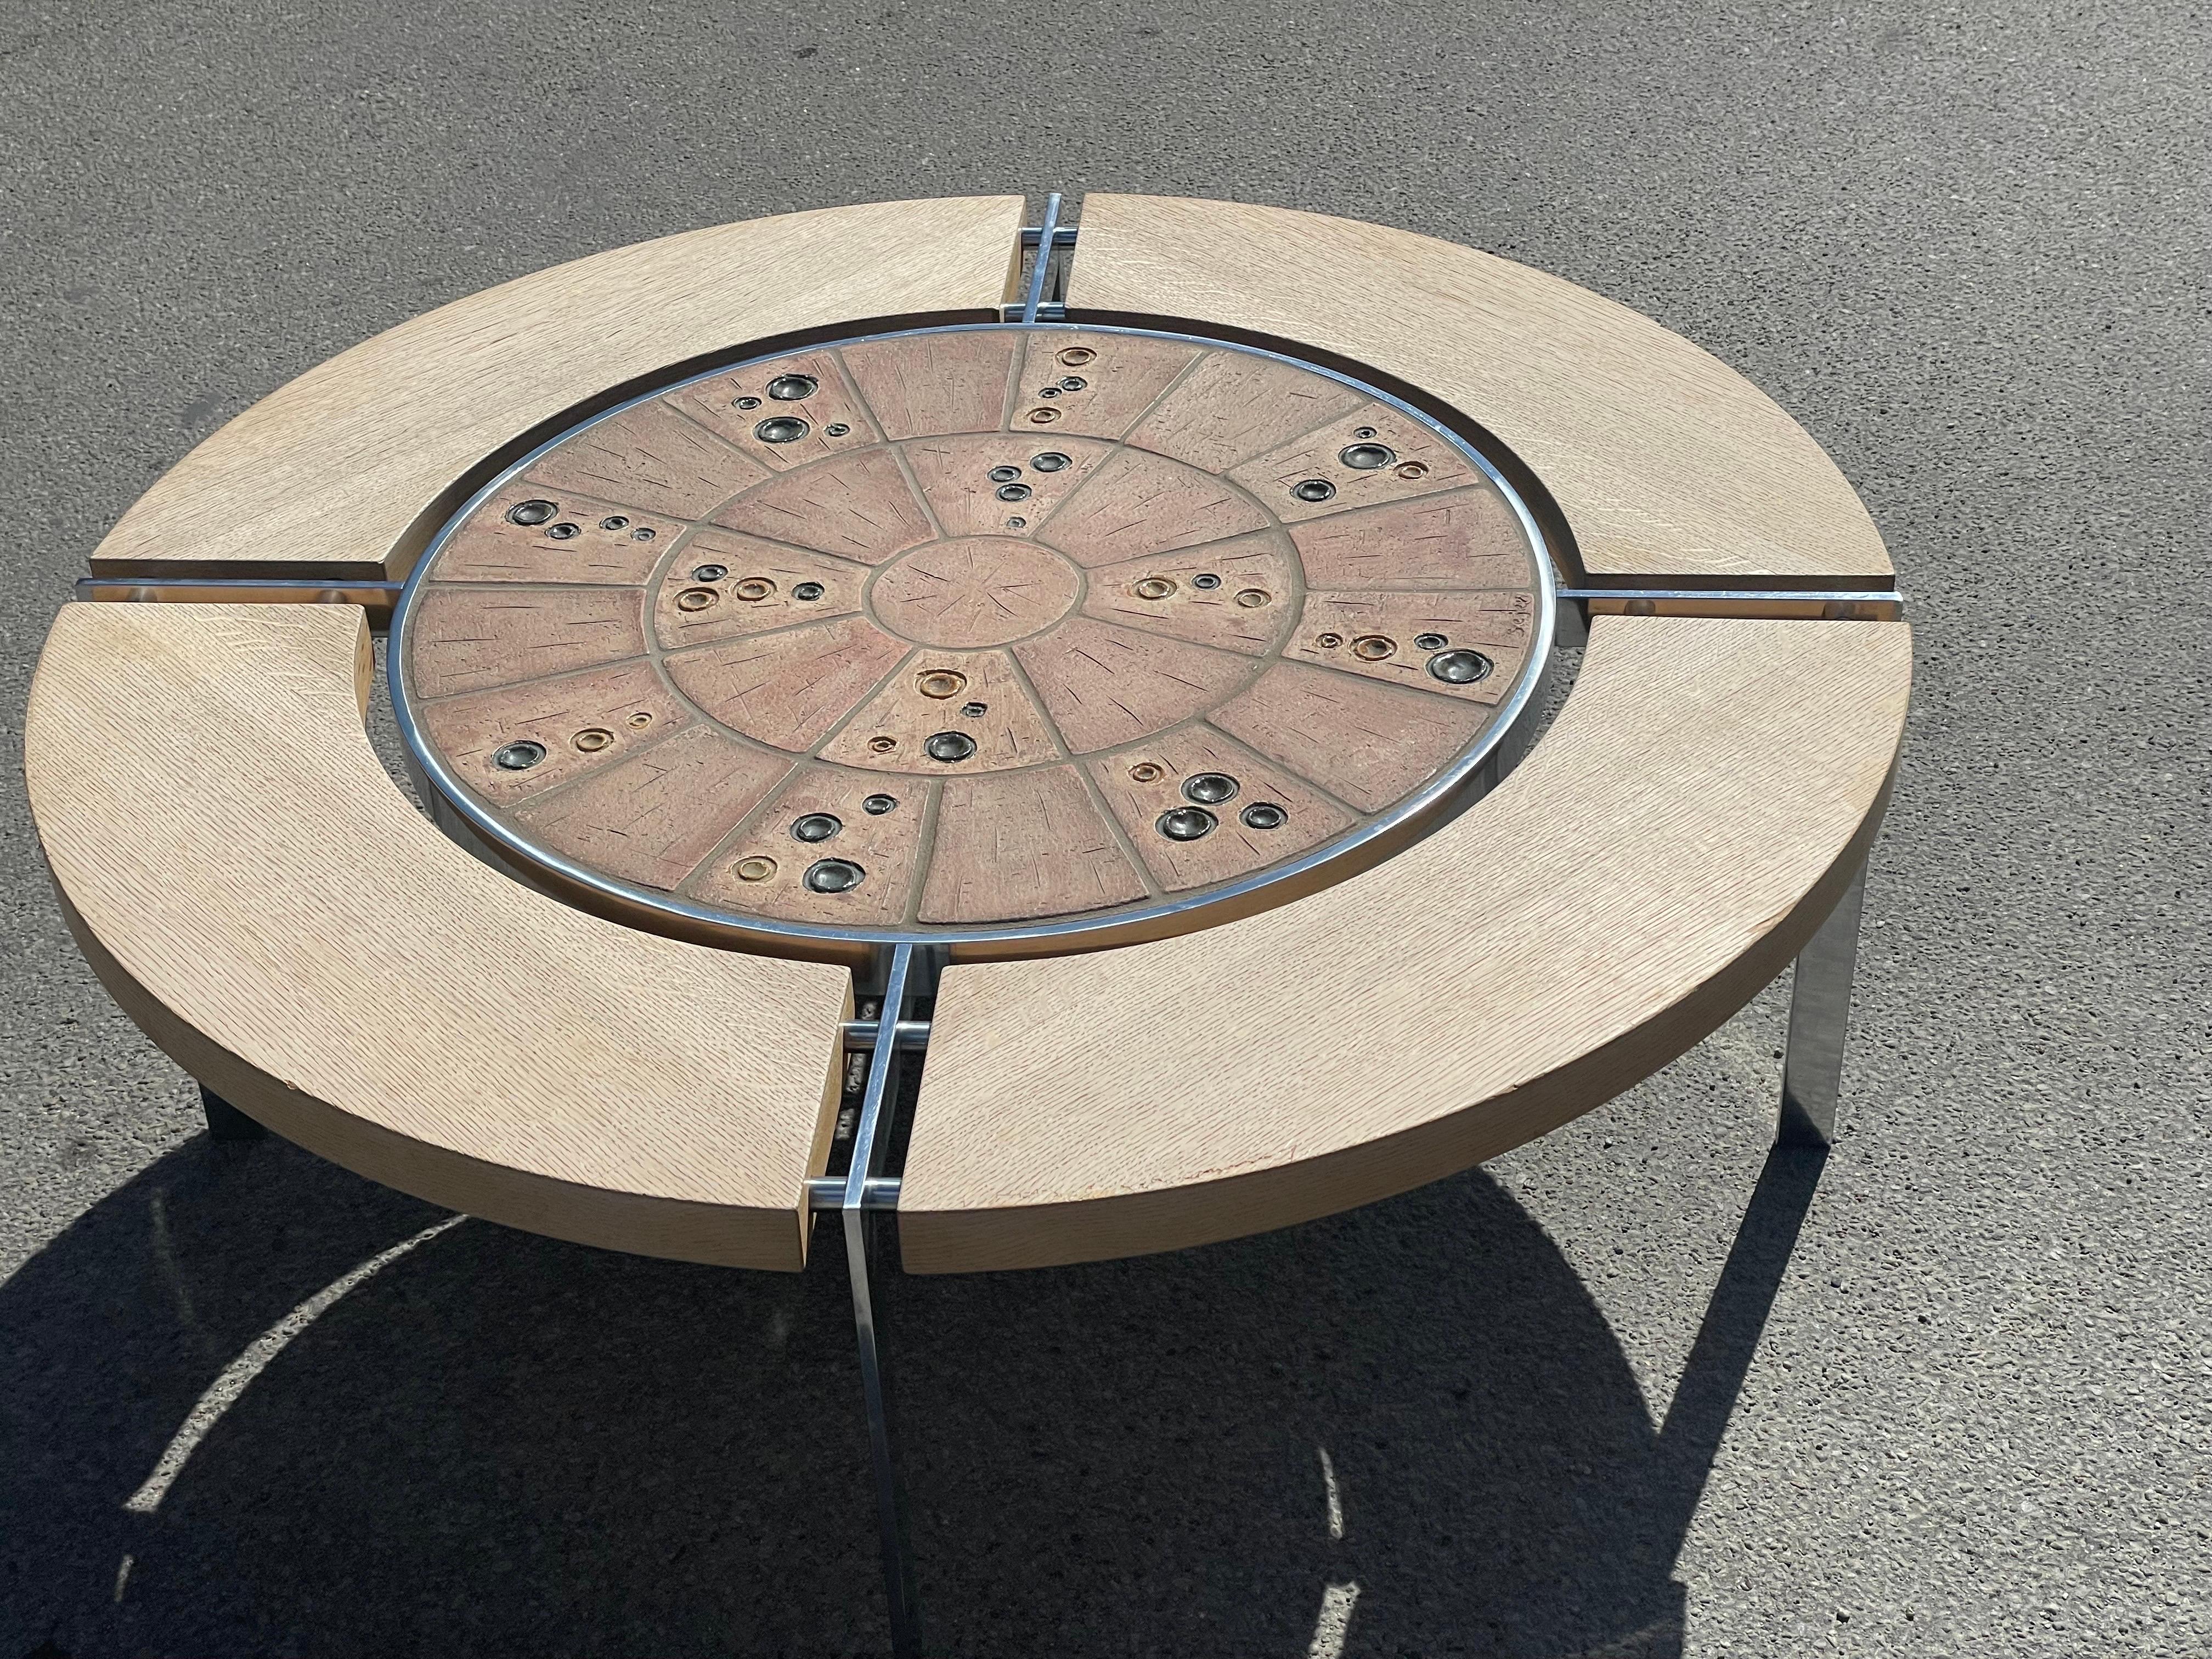 Rare Danish Mid-Century Modern Coffee Table by Svend Aage Jessen from 1970 For Sale 3